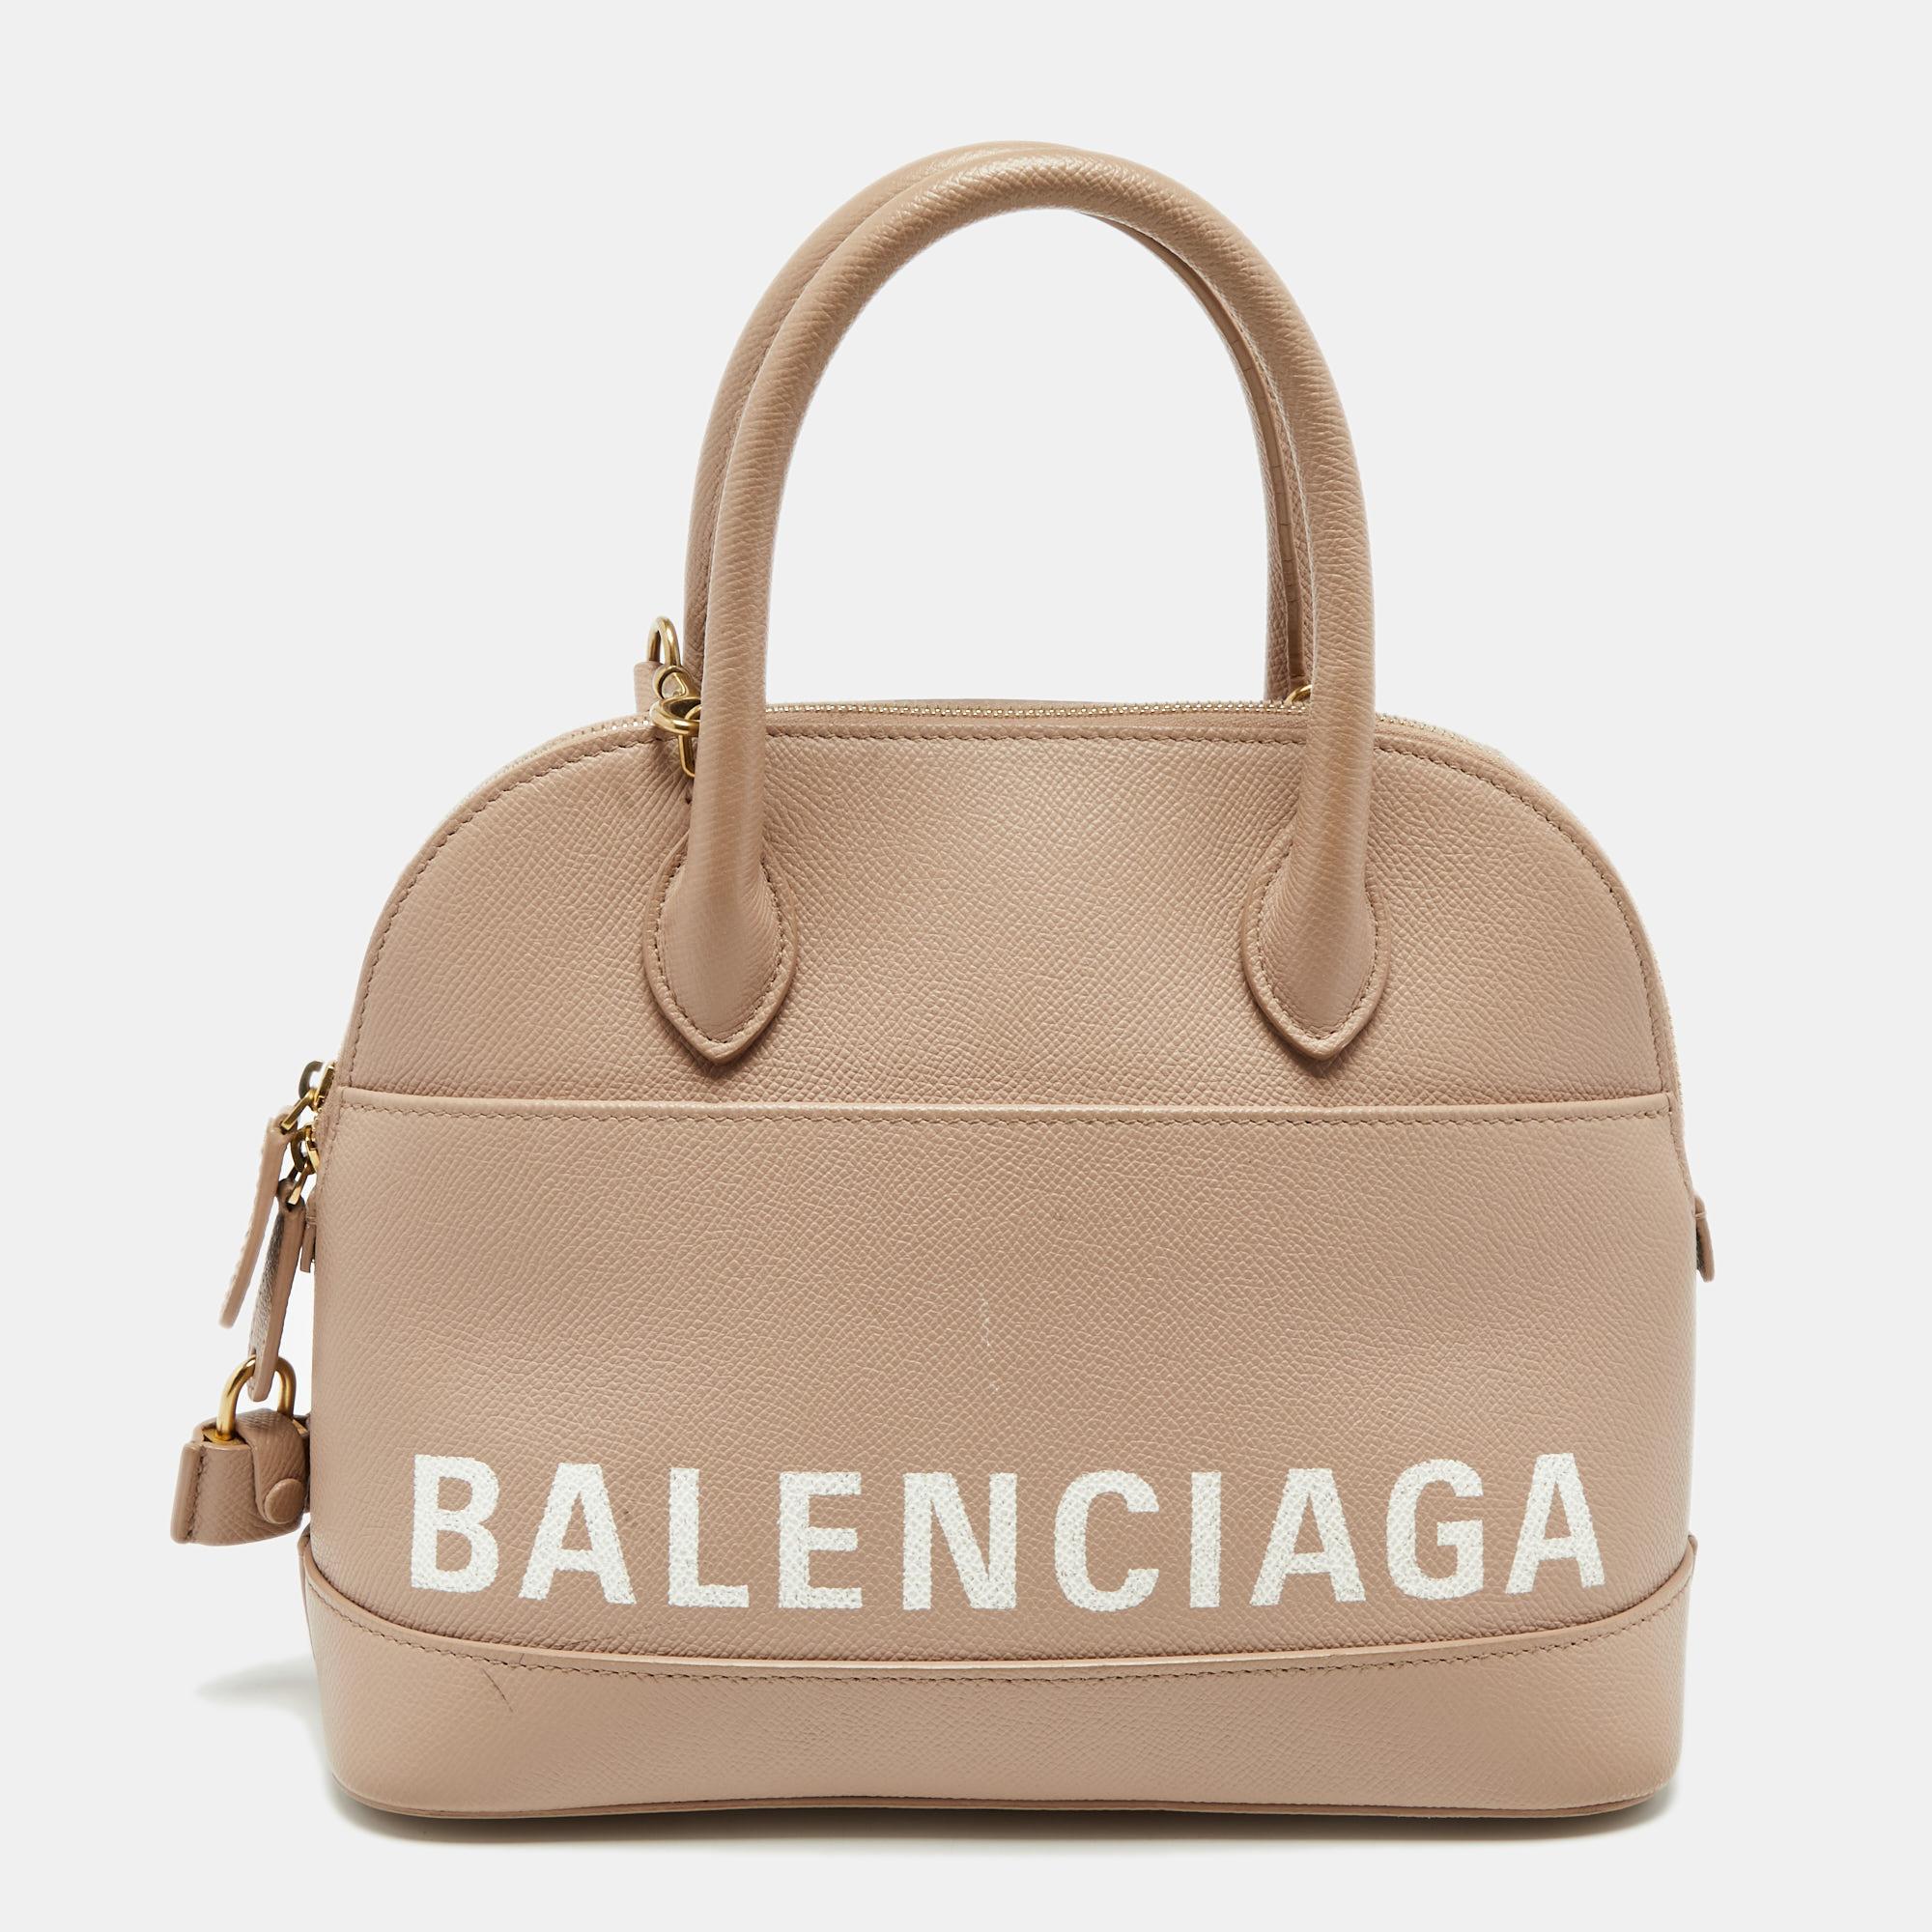 Easy to carry and stylish in appearance, this Ville satchel from the House of Balenciaga will certainly be your favorite pick this season. It is crafted using beige leather, with gold-tone hardware elevating its beauty. It provides two handles and a